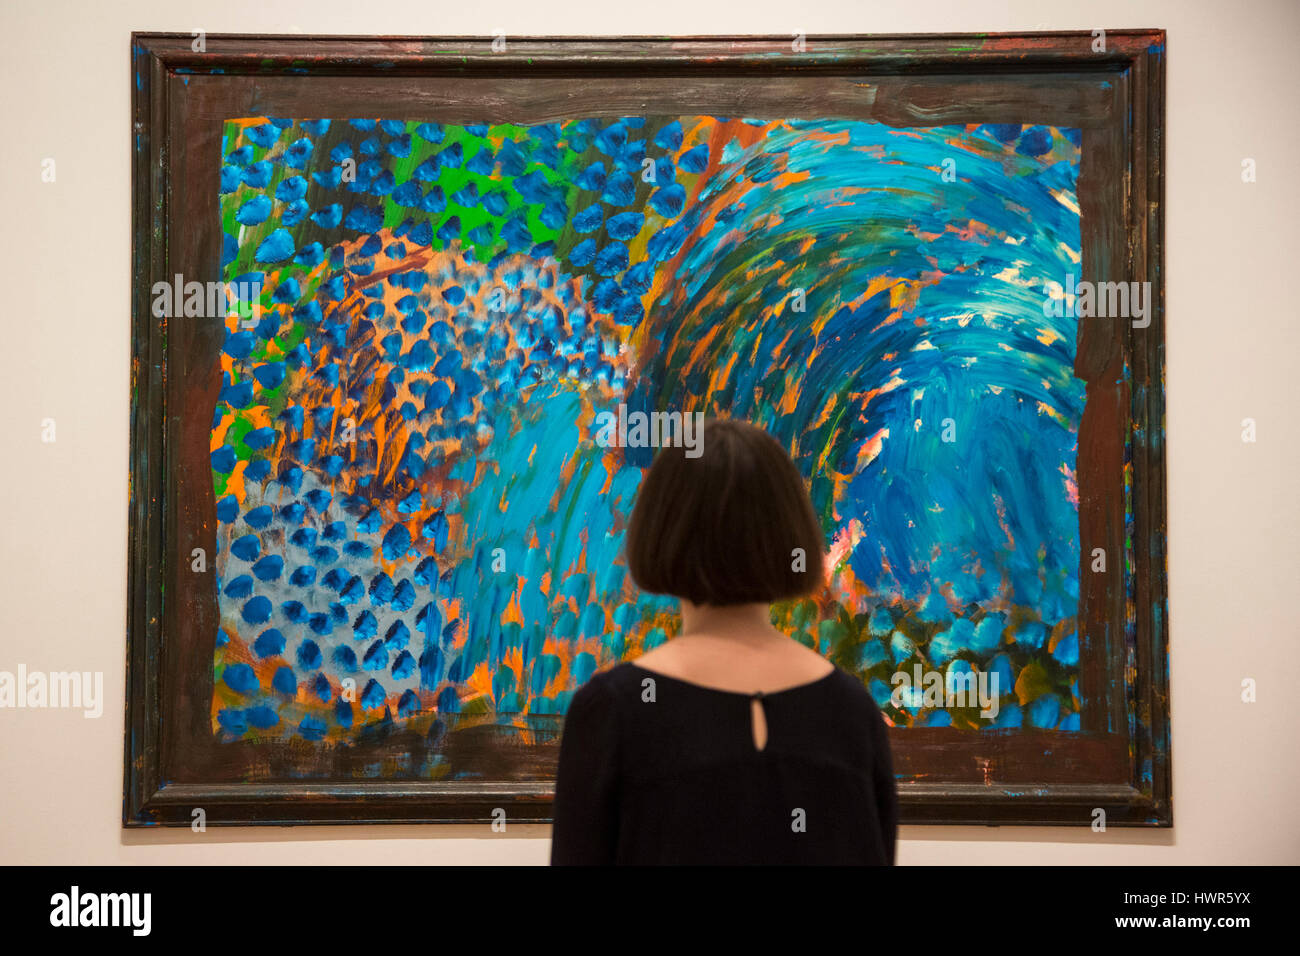 London, UK. 22 March 2017. Chez Stamos, 1998, by Howard Hodgkin. Preview of the Howard Hodgkin (1932-2017) exhibition Absent Friends at the National Portrait Gallery. The exhibition is open to the public from 23 March to 18 June 2017. Stock Photo